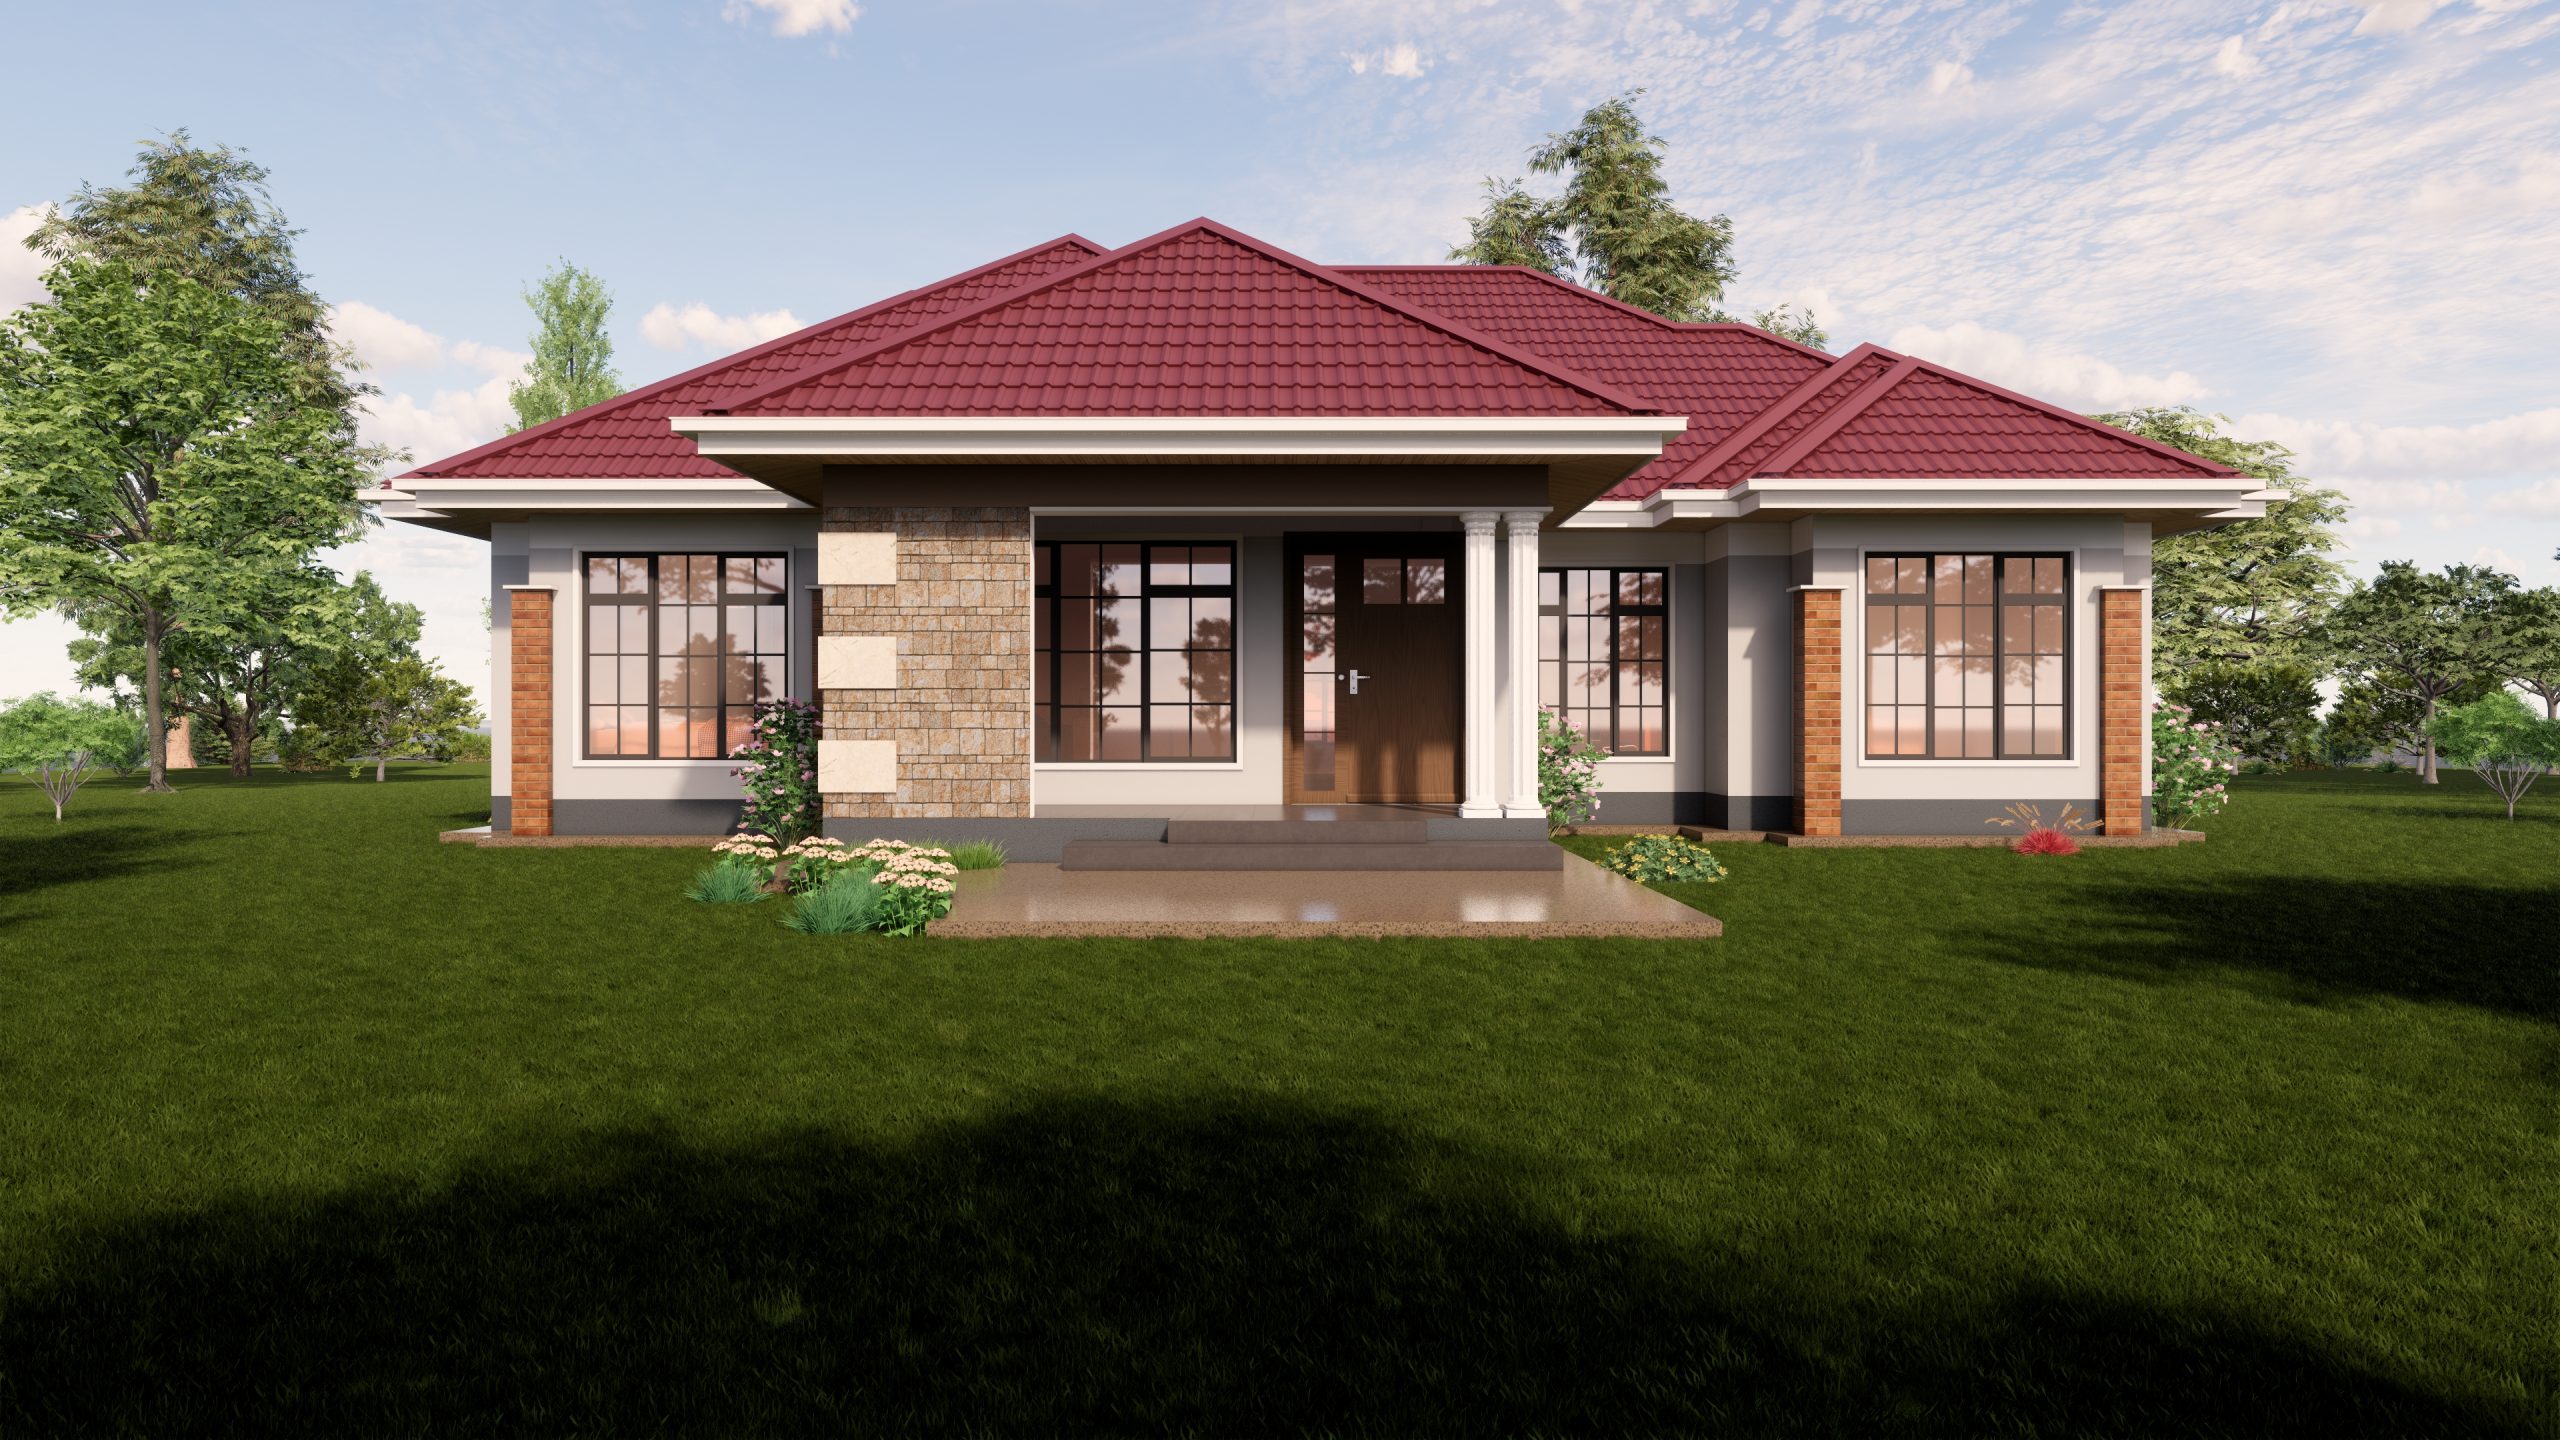 A Graceful Three Bedroom Bungalow House Plan